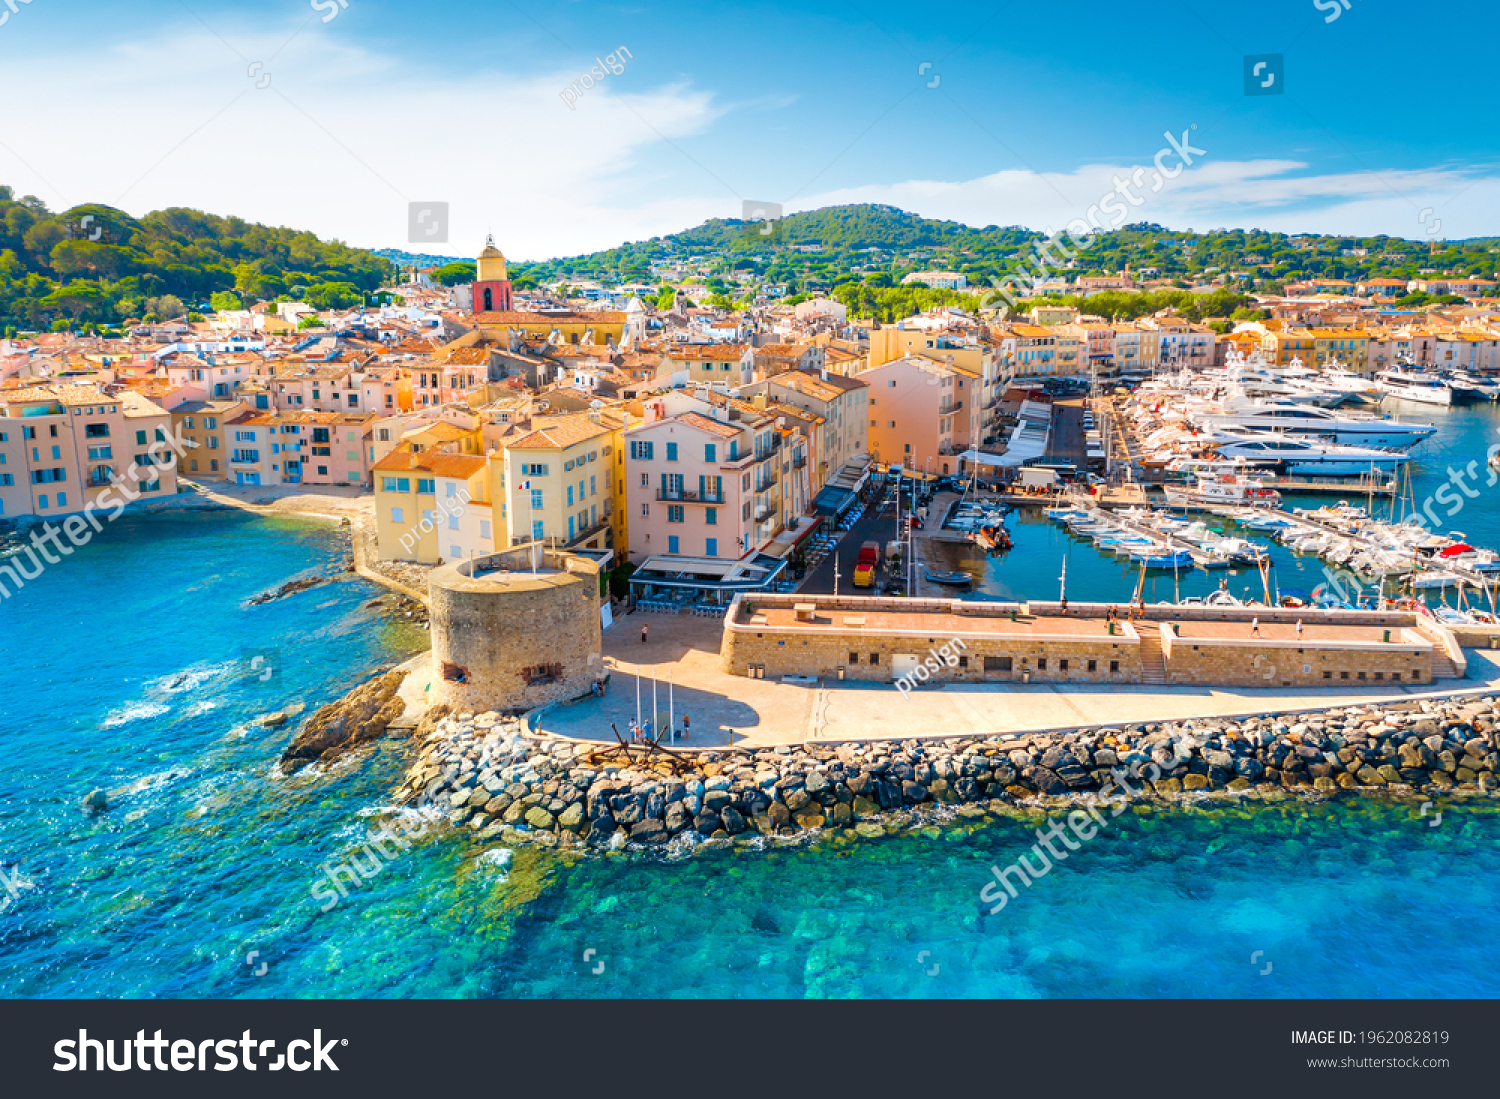 View of the city of Saint-Tropez, Provence, Cote d'Azur, a popular travel destination in Europe #1962082819